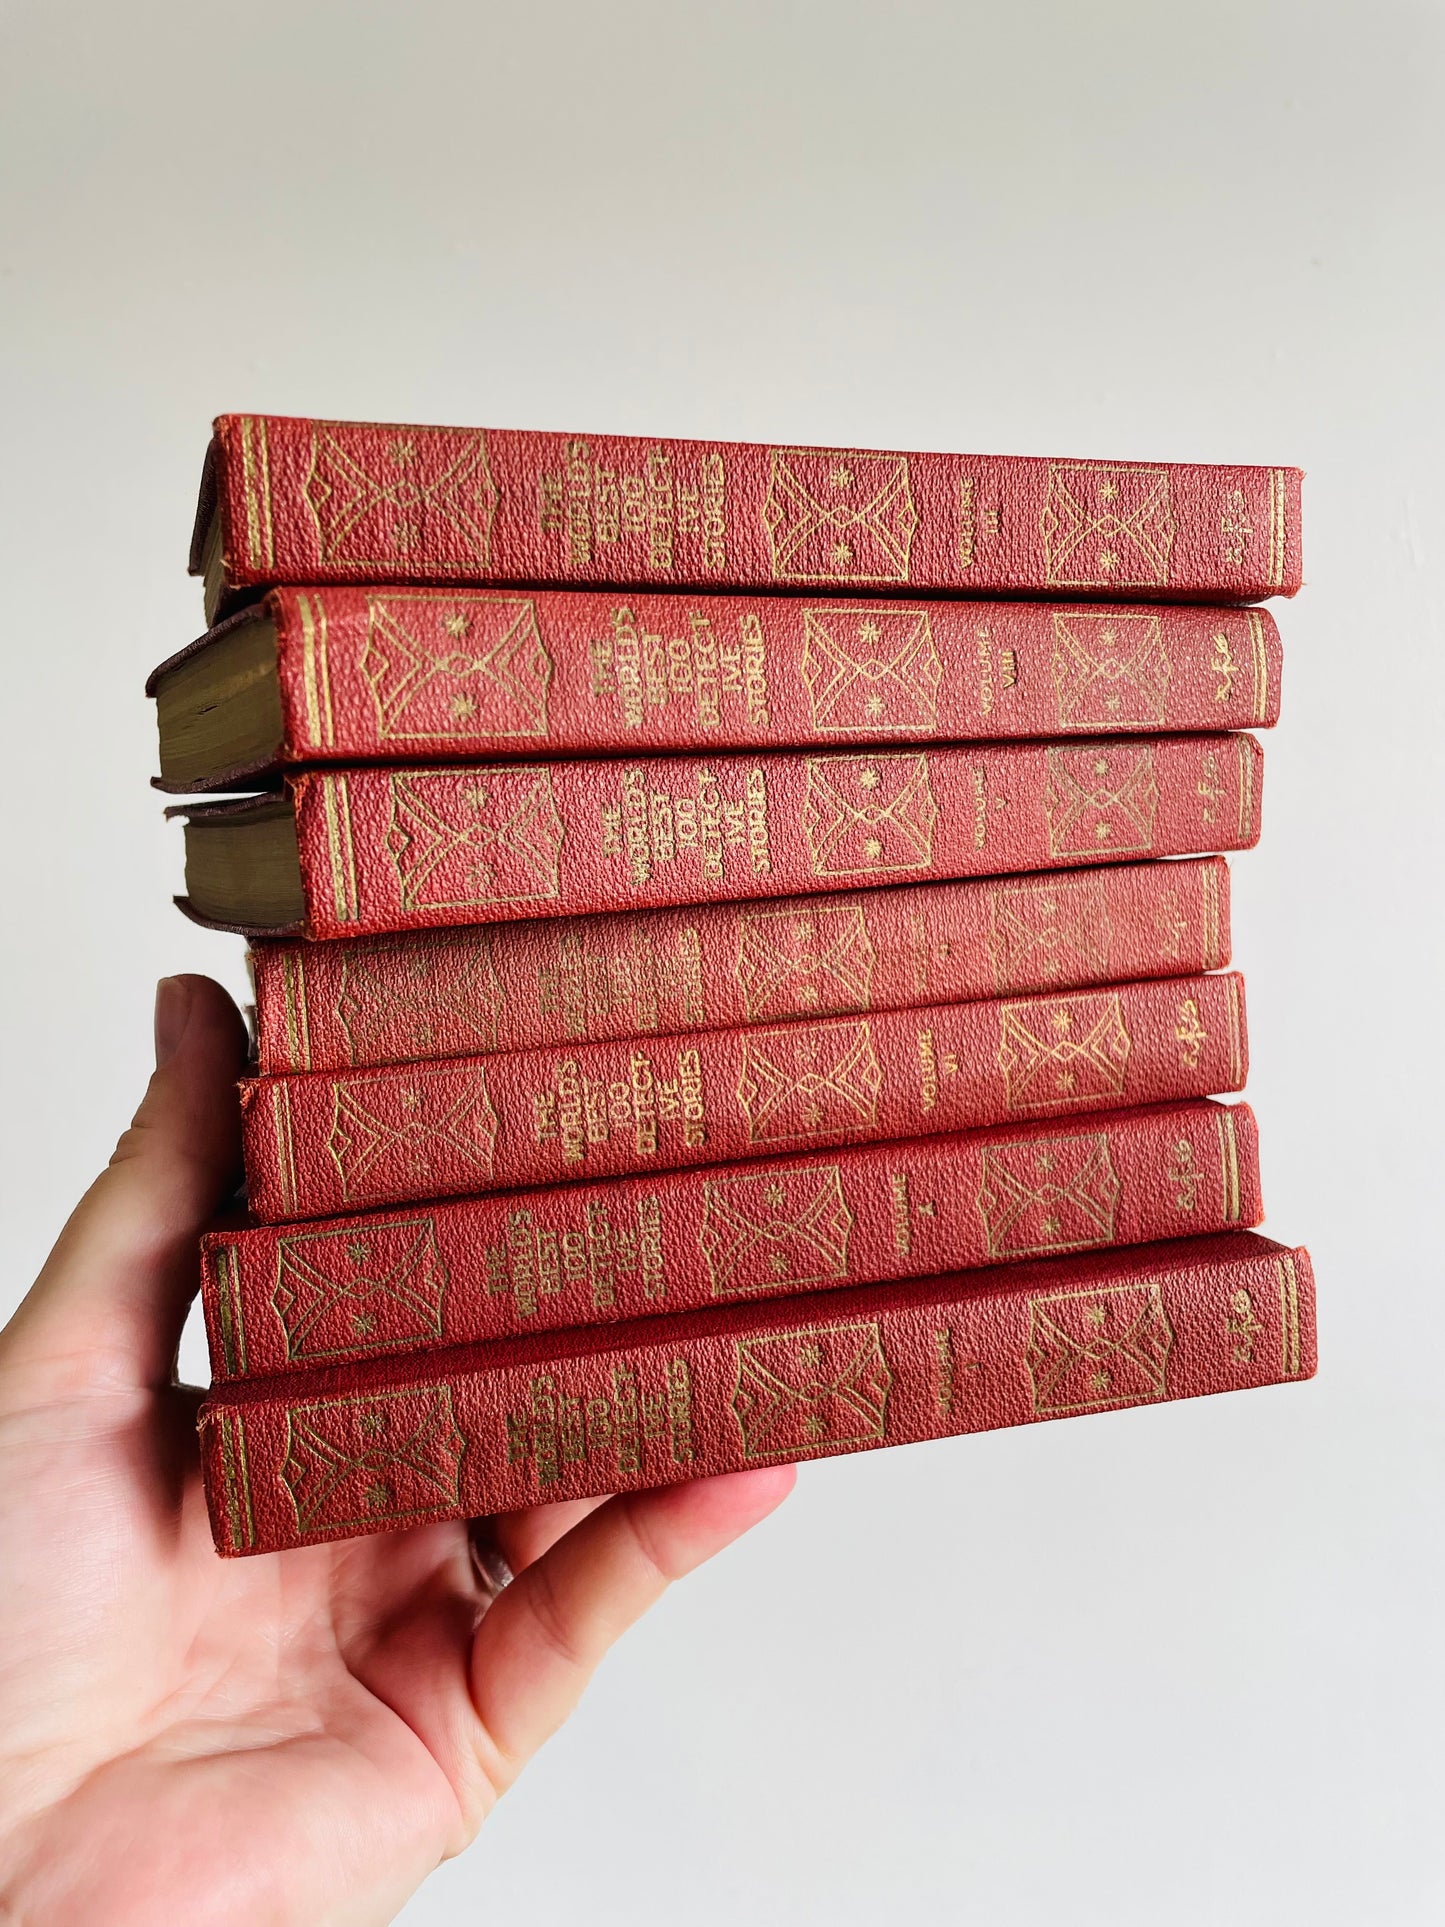 The World's Best 100 Detective Stories (1929) - Bundle of 7 Hardcover Books - Editor in Chief Eugene Thwing - Volumes 1, 2, 3, 5, 6, 8, 10